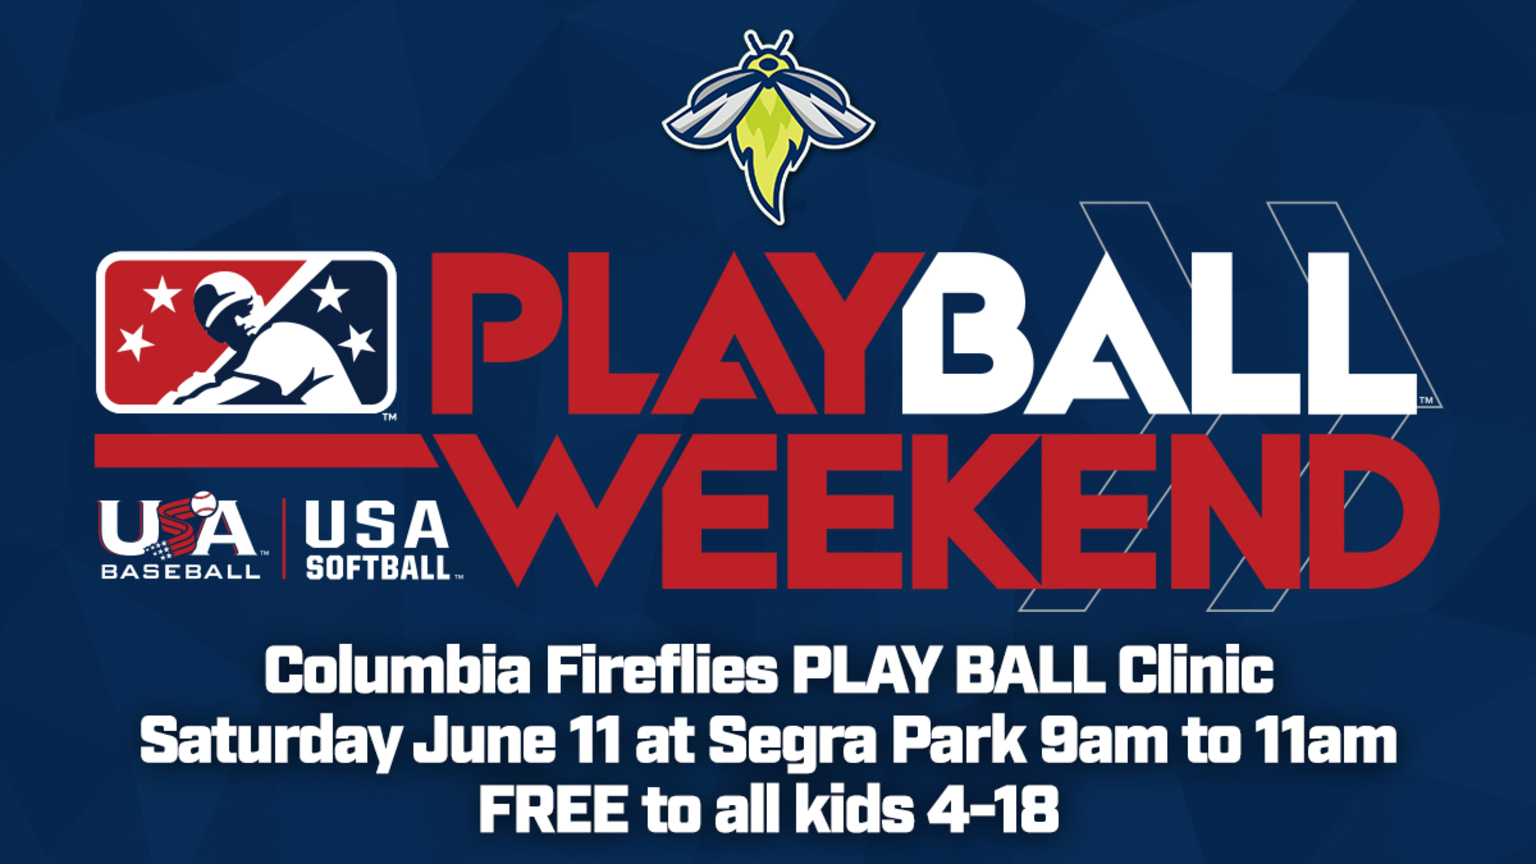 Fireflies to Host Free MLB Play Ball Clinic for Kids Age 4-18